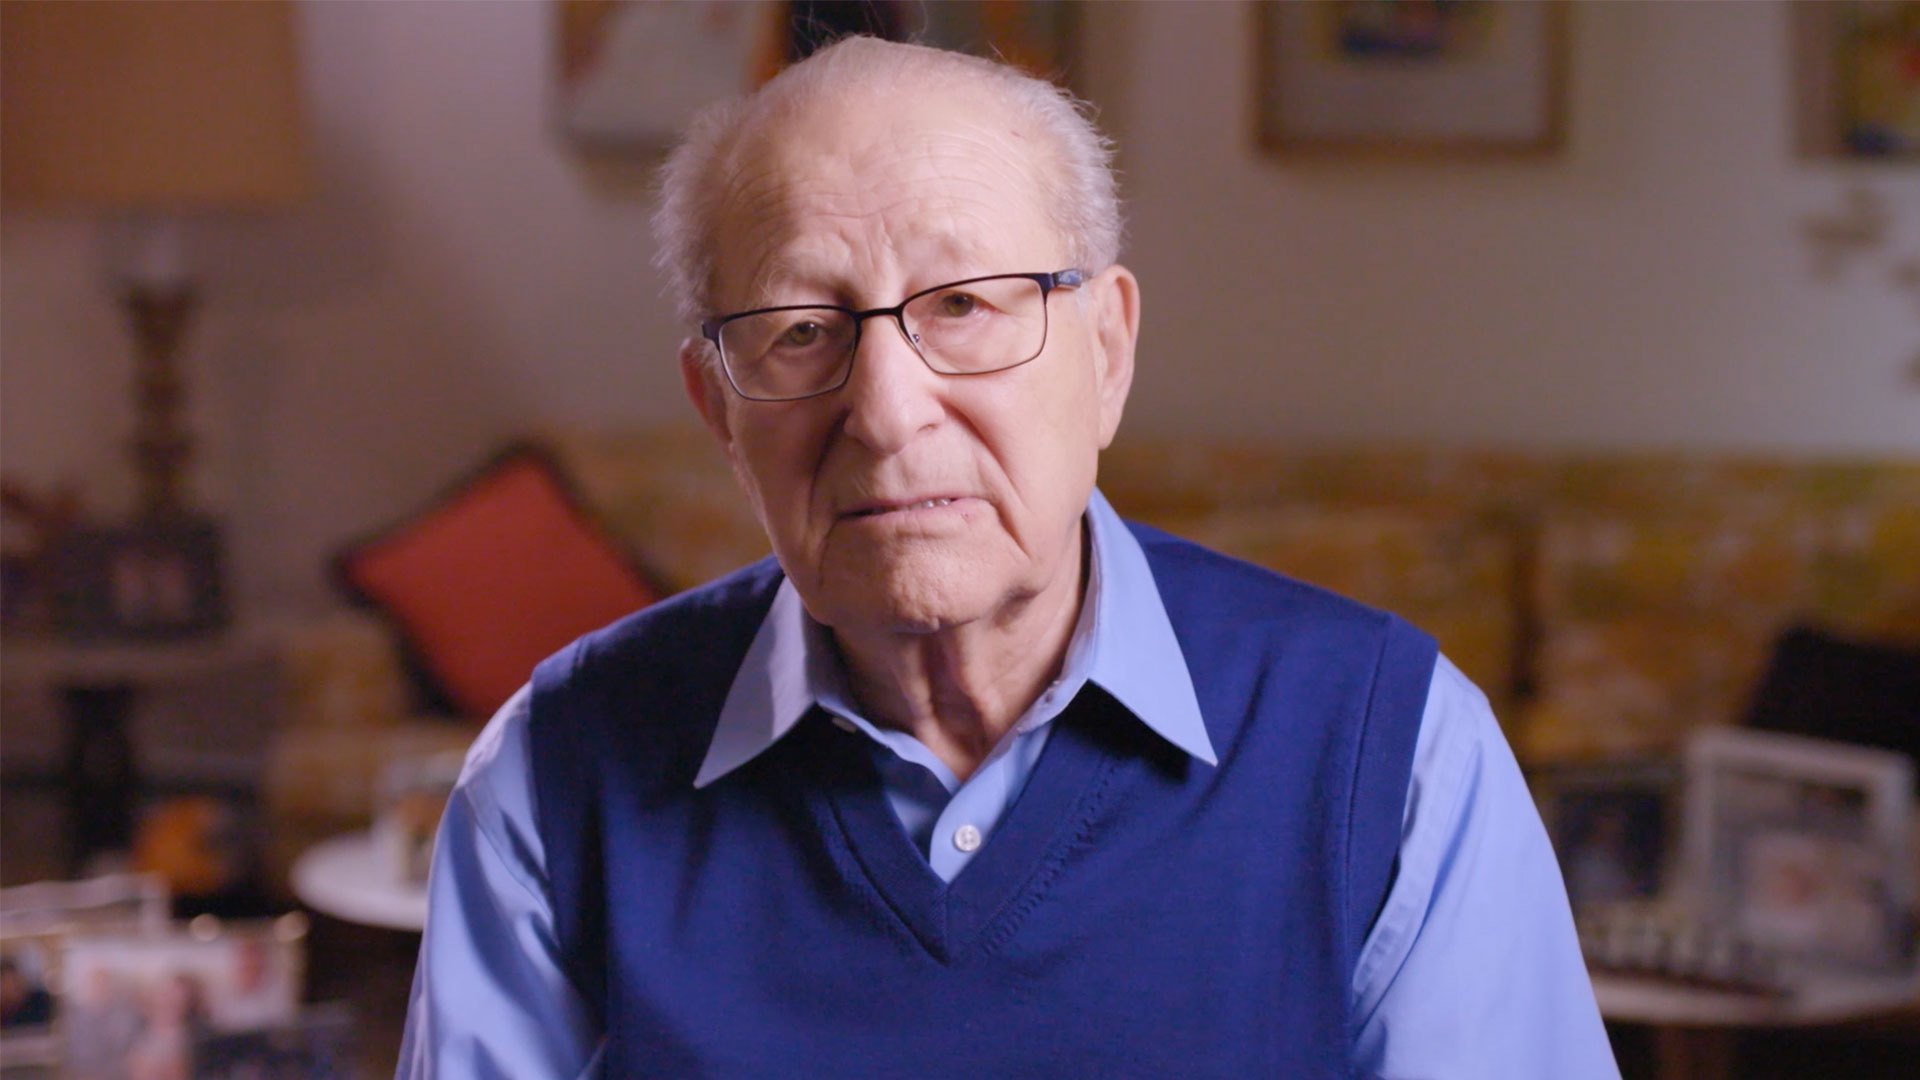 Irving Roth - Living as a Child During the Holocaust